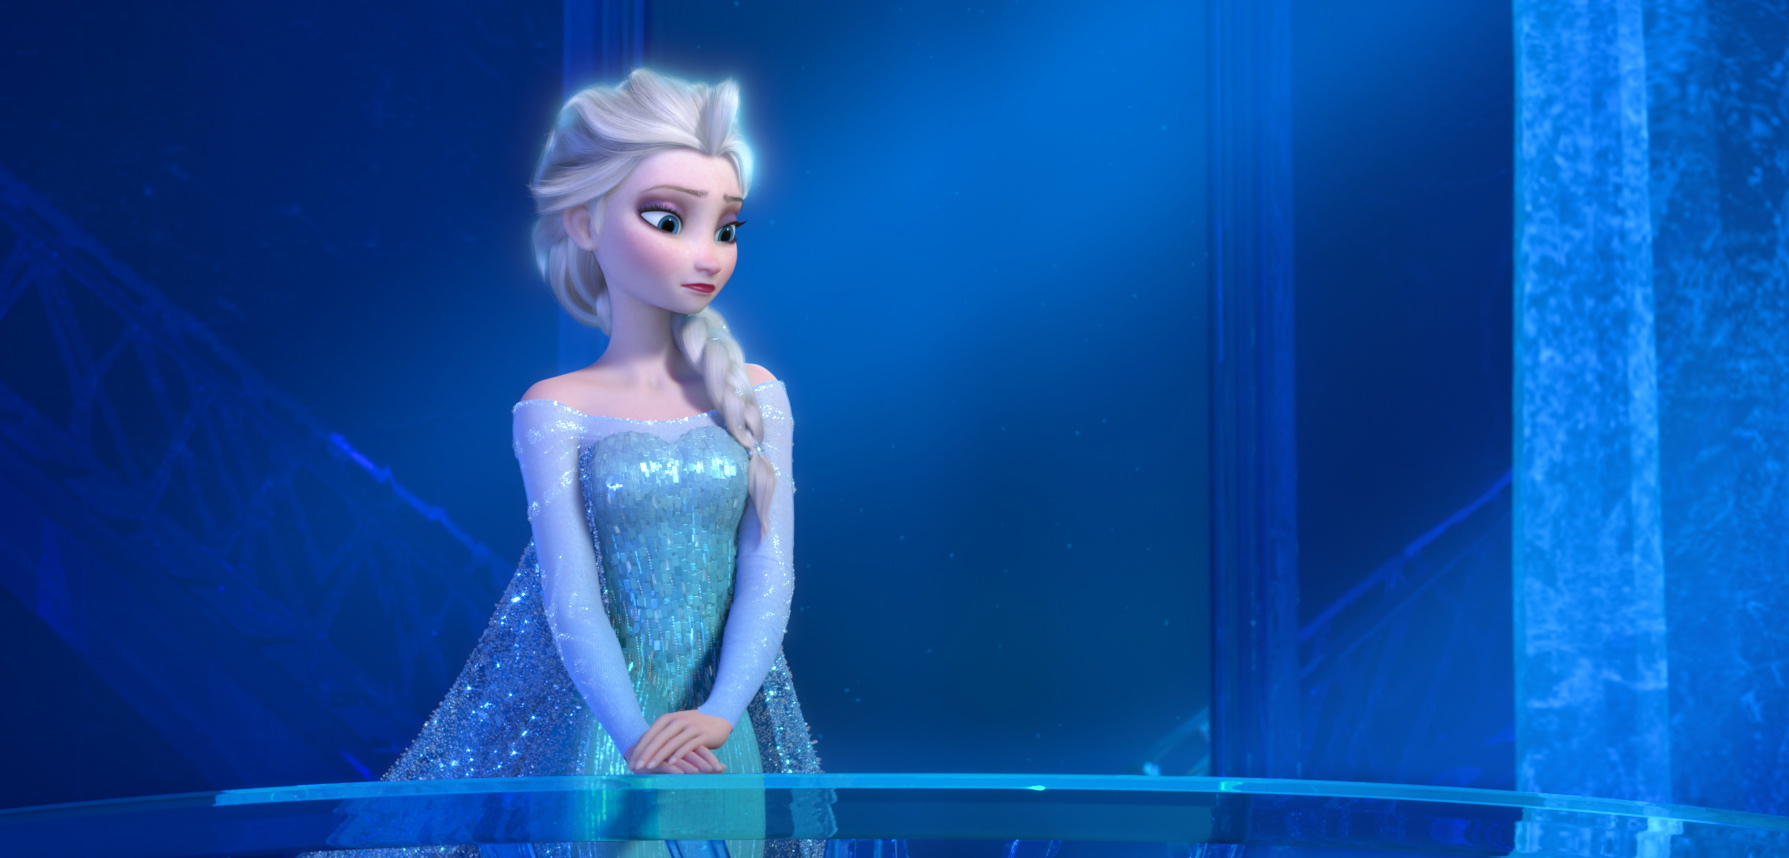 A teenage Elsa the Snow Queen, voiced by Idina Menzel, in a scene from the animated feature &quot;Frozen.&quot;
Disney